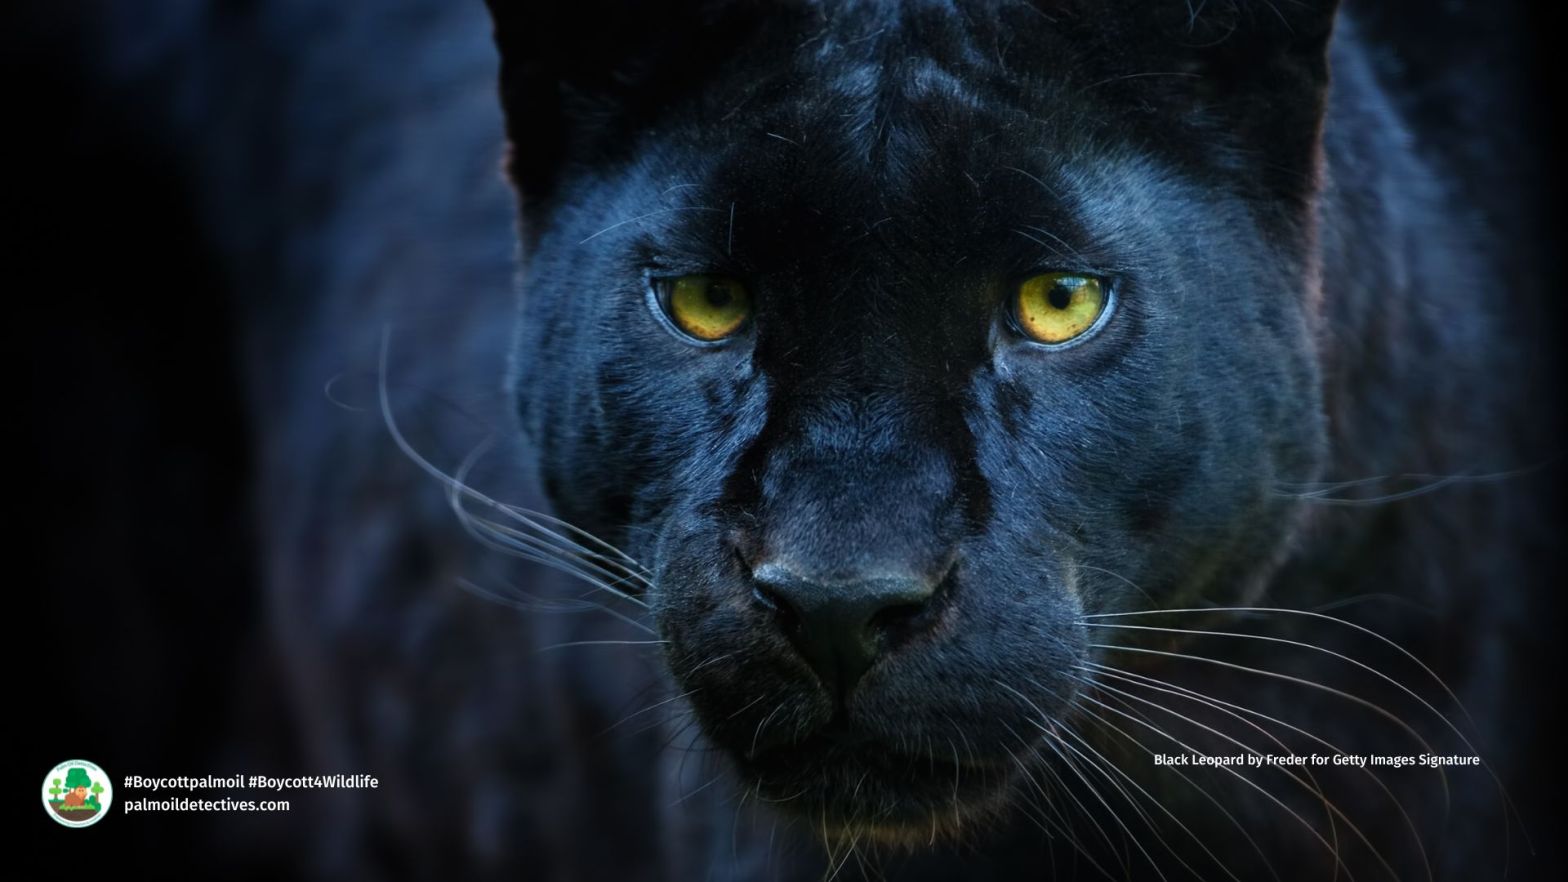 black-leopard-by-freder-for-getty-images-signature-asia